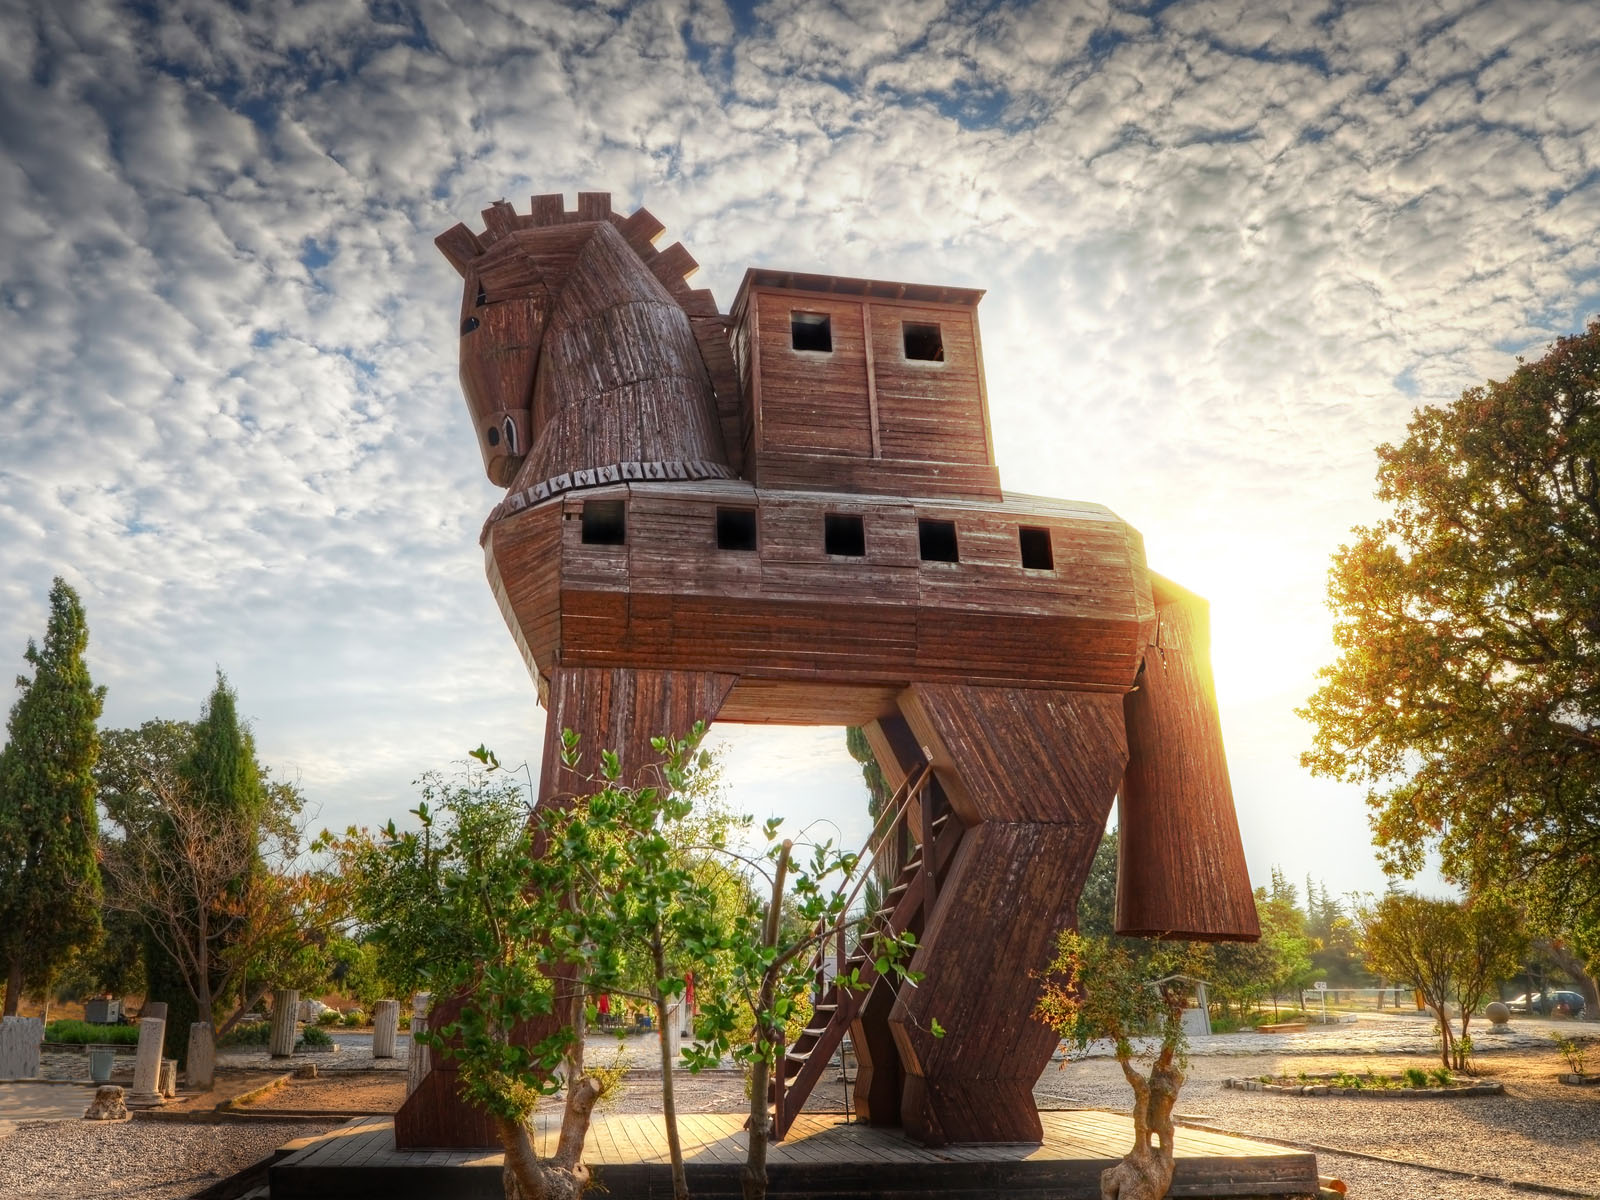 A reconstruction of The Trojan Horse at the site of Troy